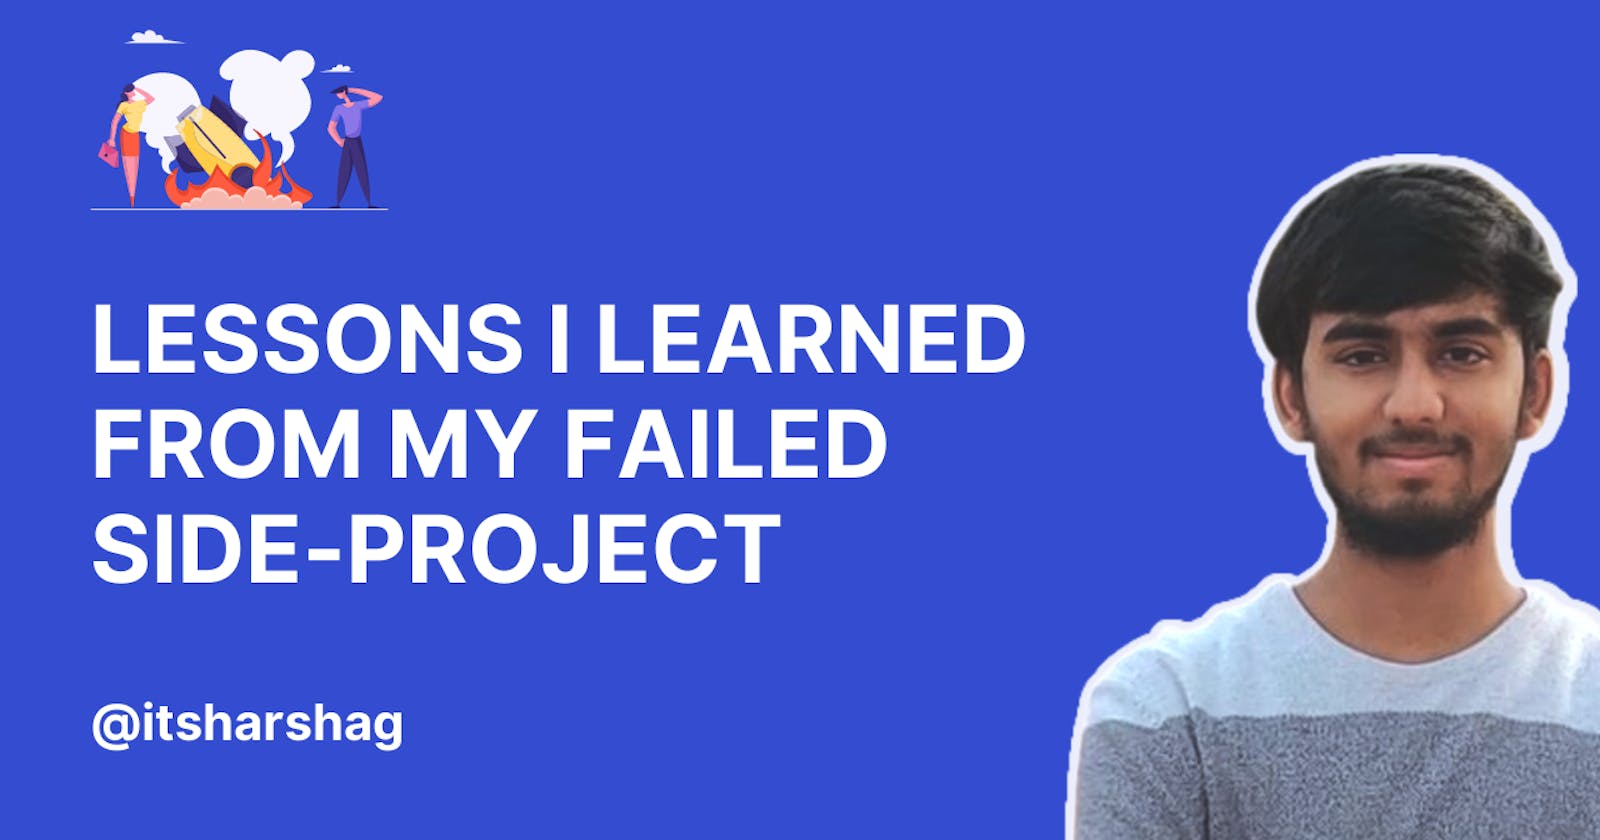 Lessons I learned from my failed side project